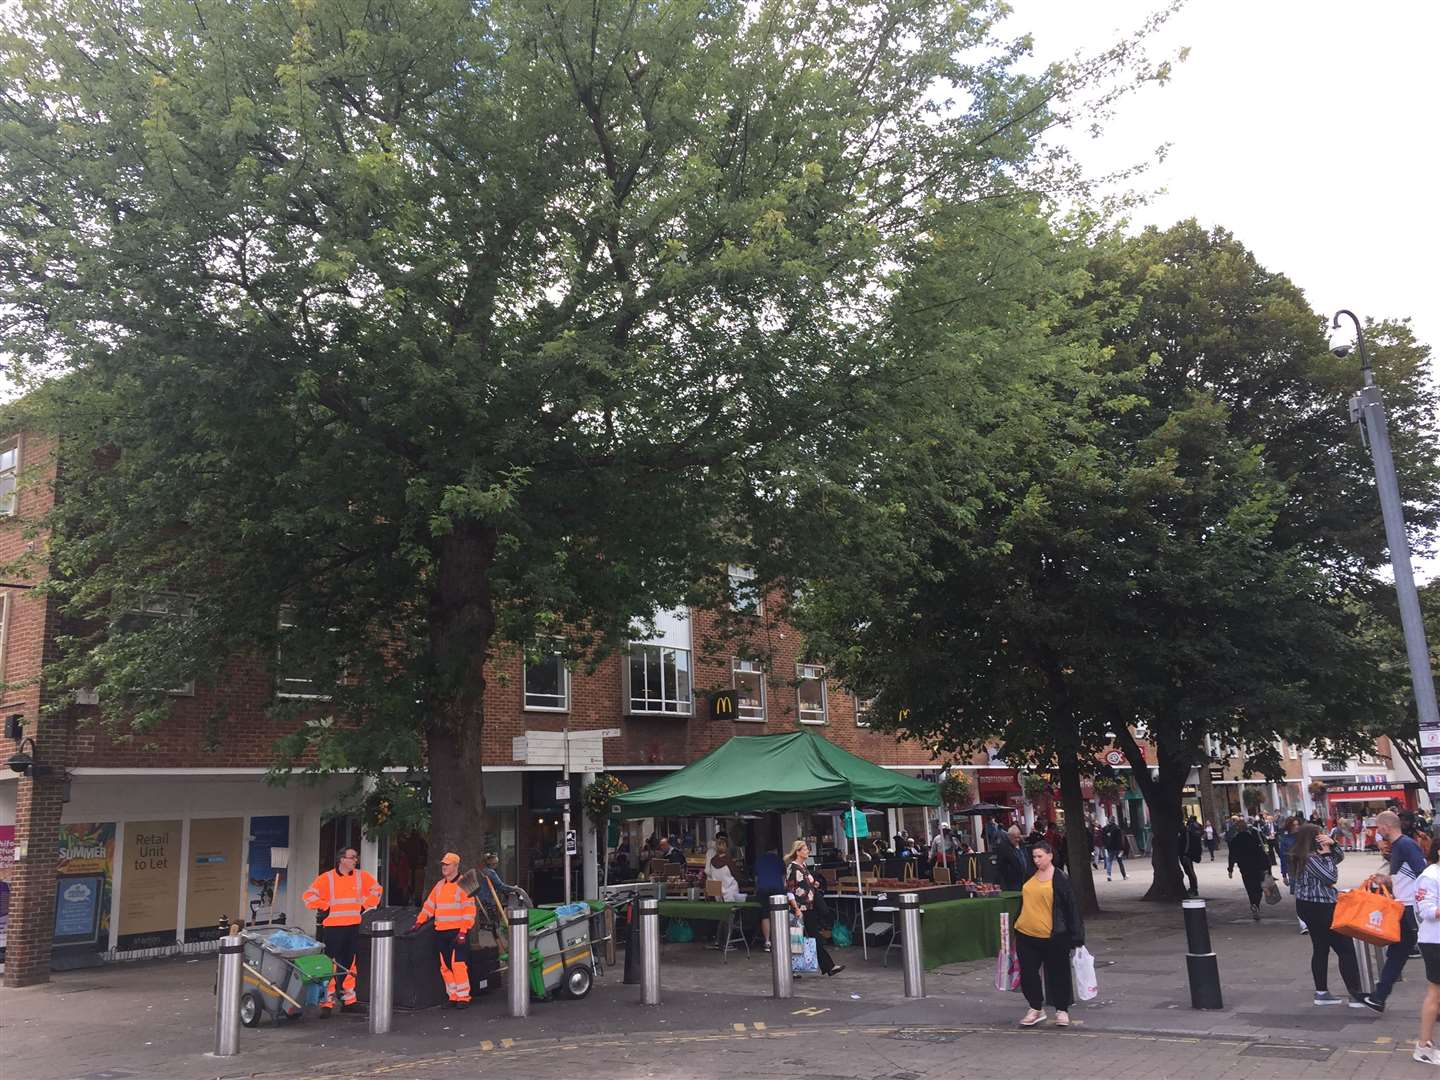 Trees in St George's Street were set to be felled, but have since been saved